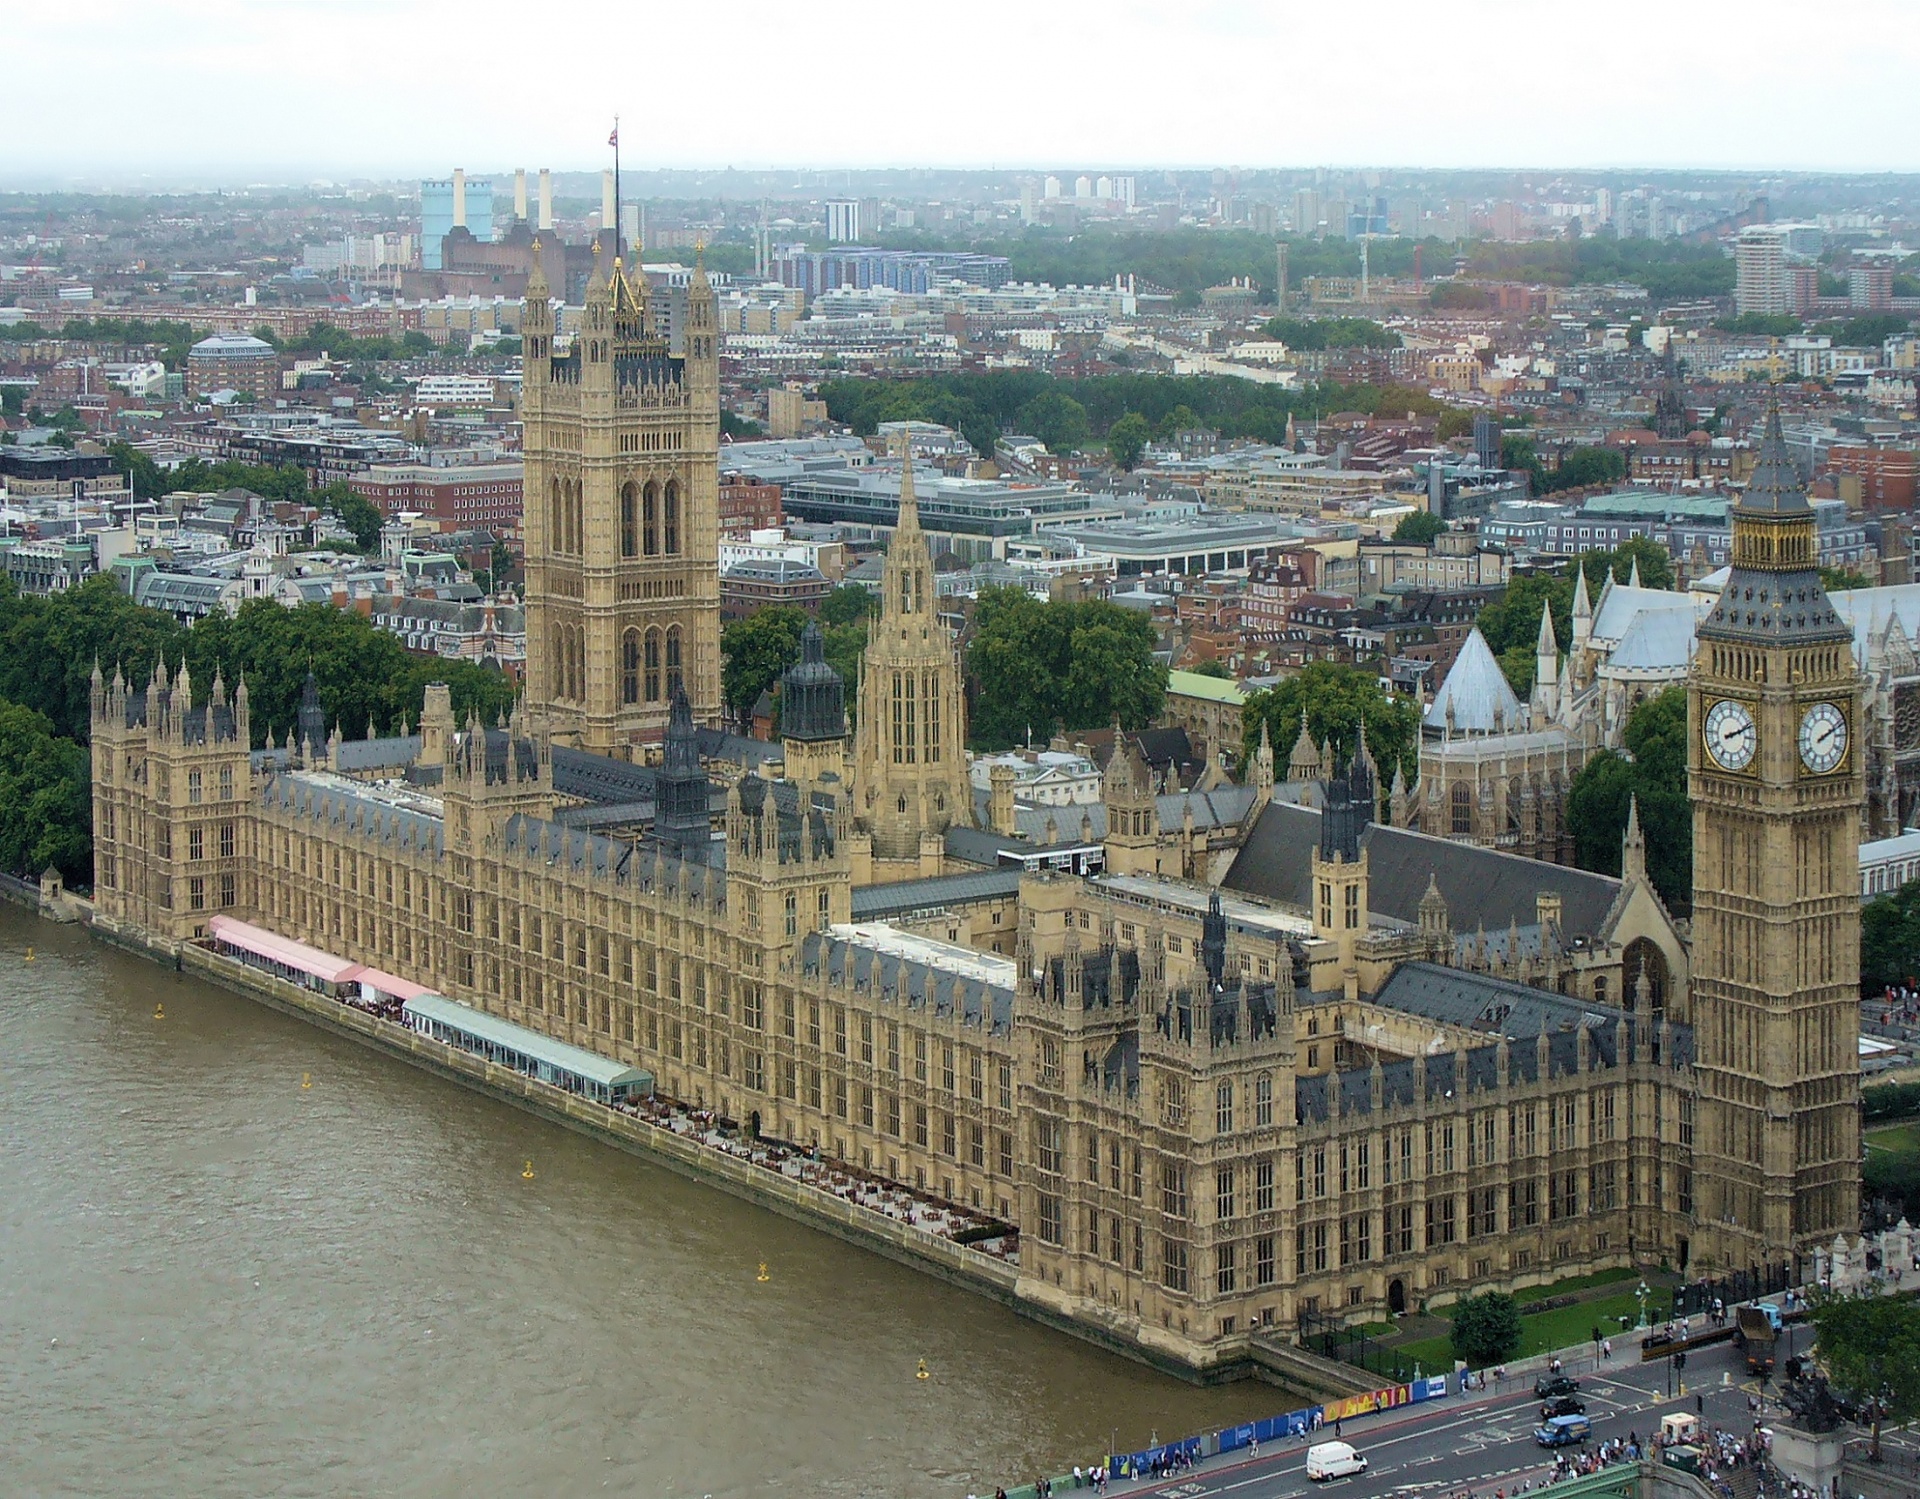 Aerial view of Westminster Place and Big Ben on the Thames River in London, England